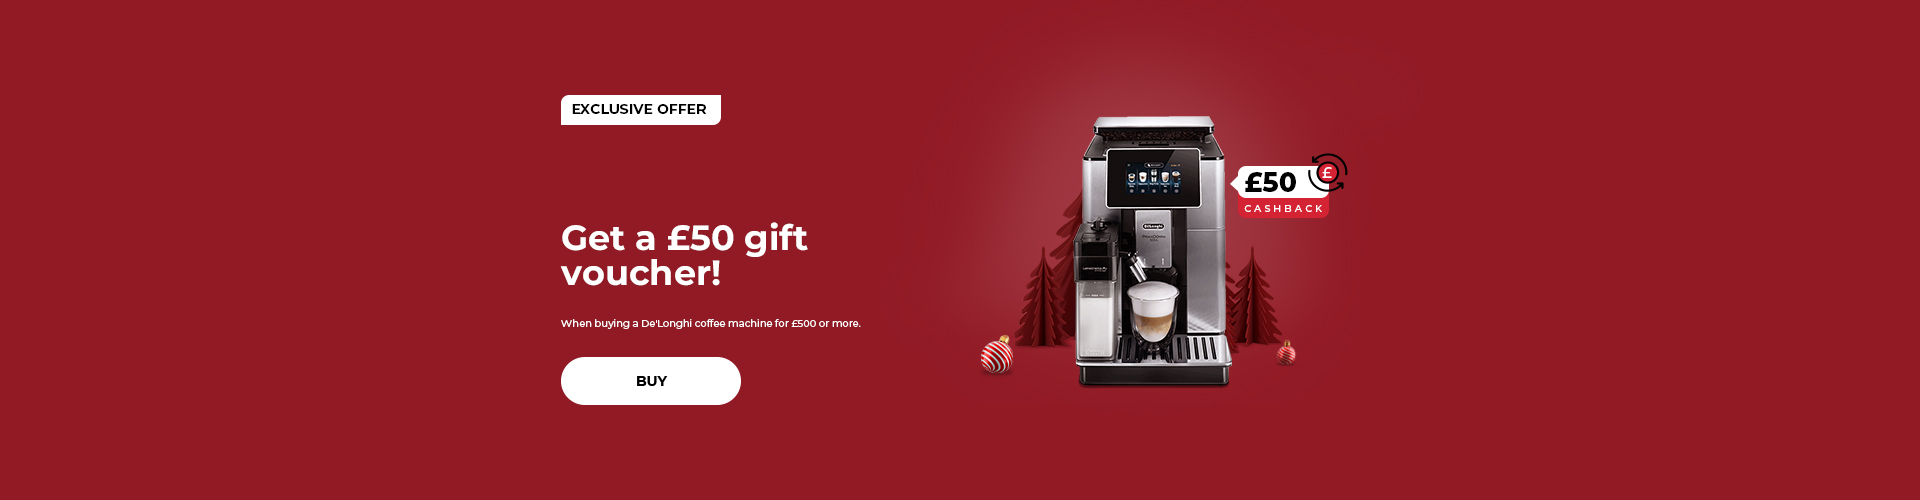 "Get a €50 gift voucher! When buying a De'Longhi coffee machine for €500 or more."